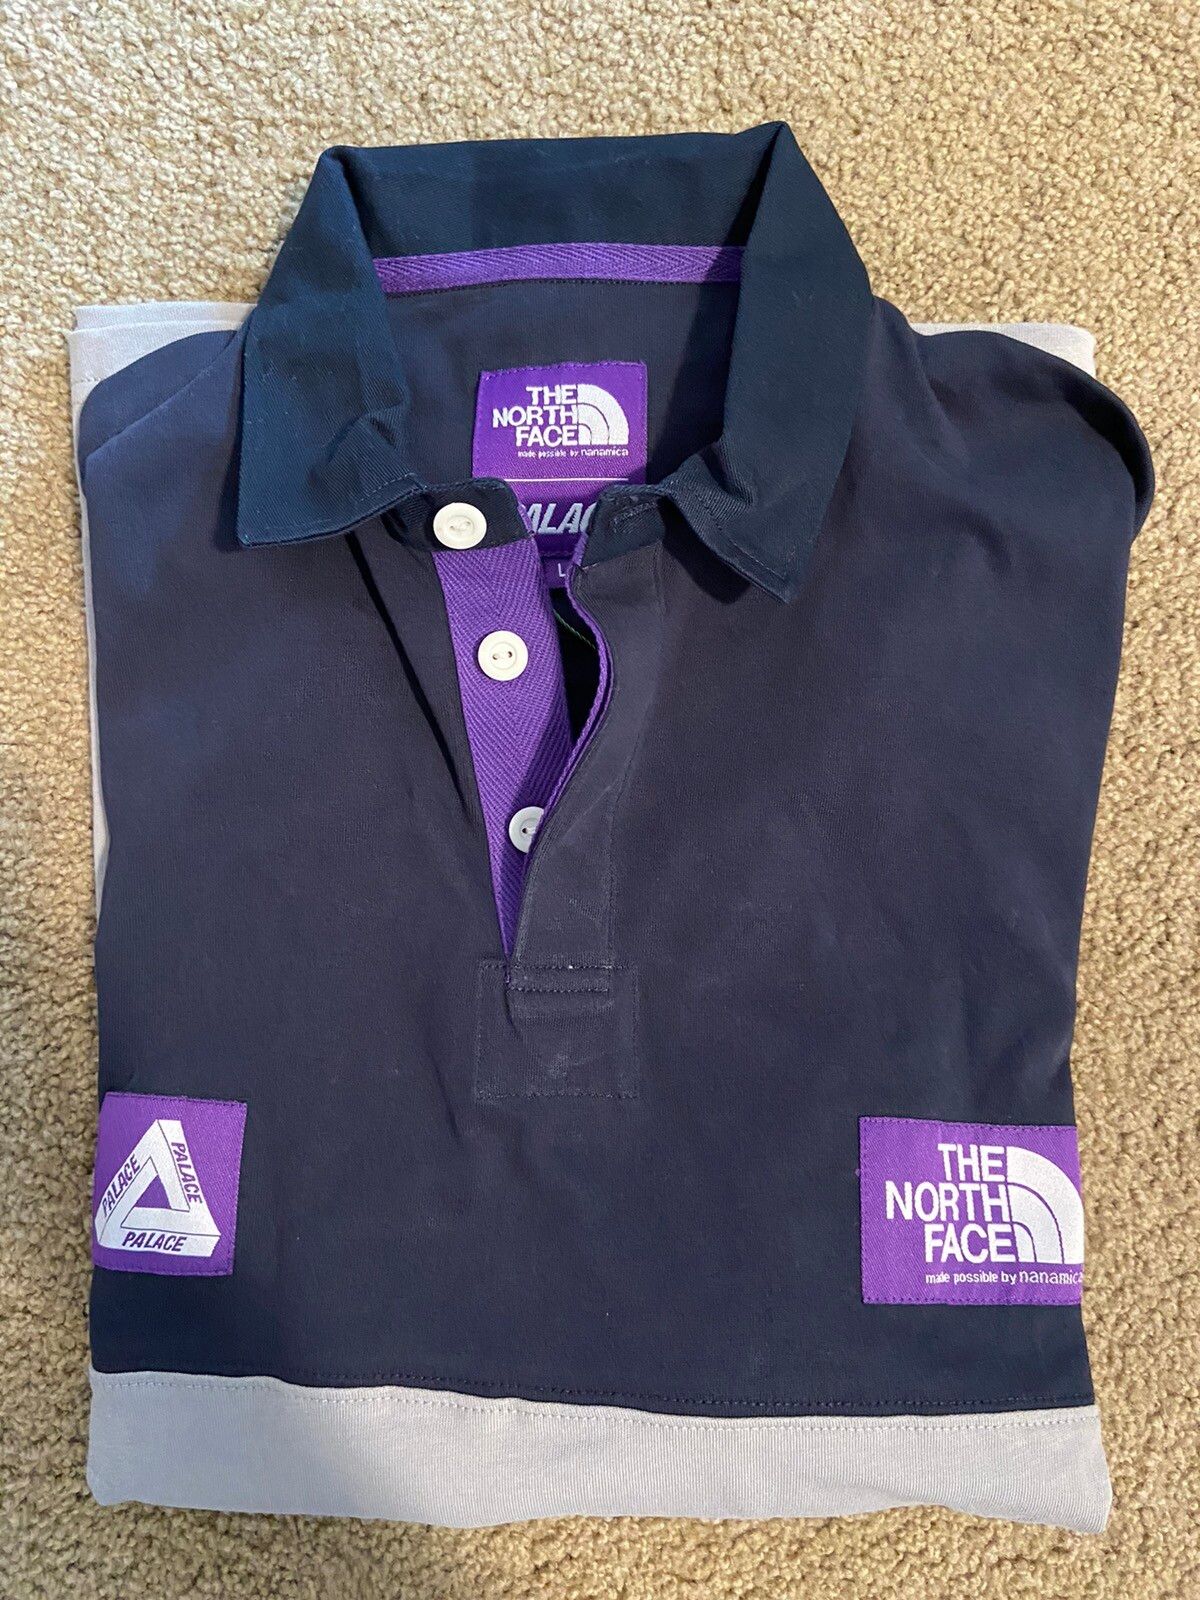 Palace Palace TNF purple label high bulky rugby shirt | Grailed